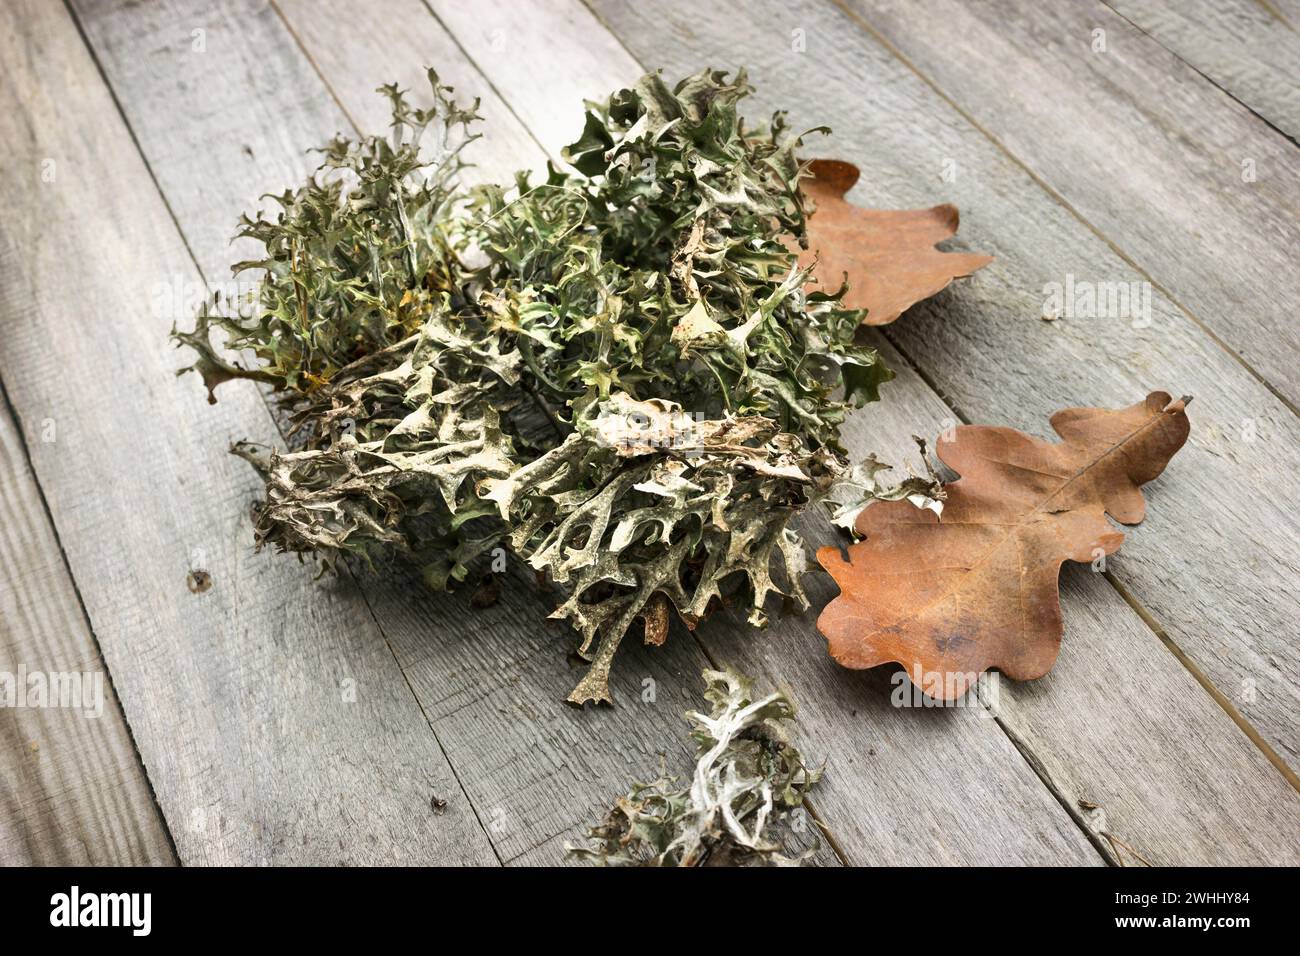 Icelandic moss (Cetraria islandica) and autumn leaves on an table Stock Photo